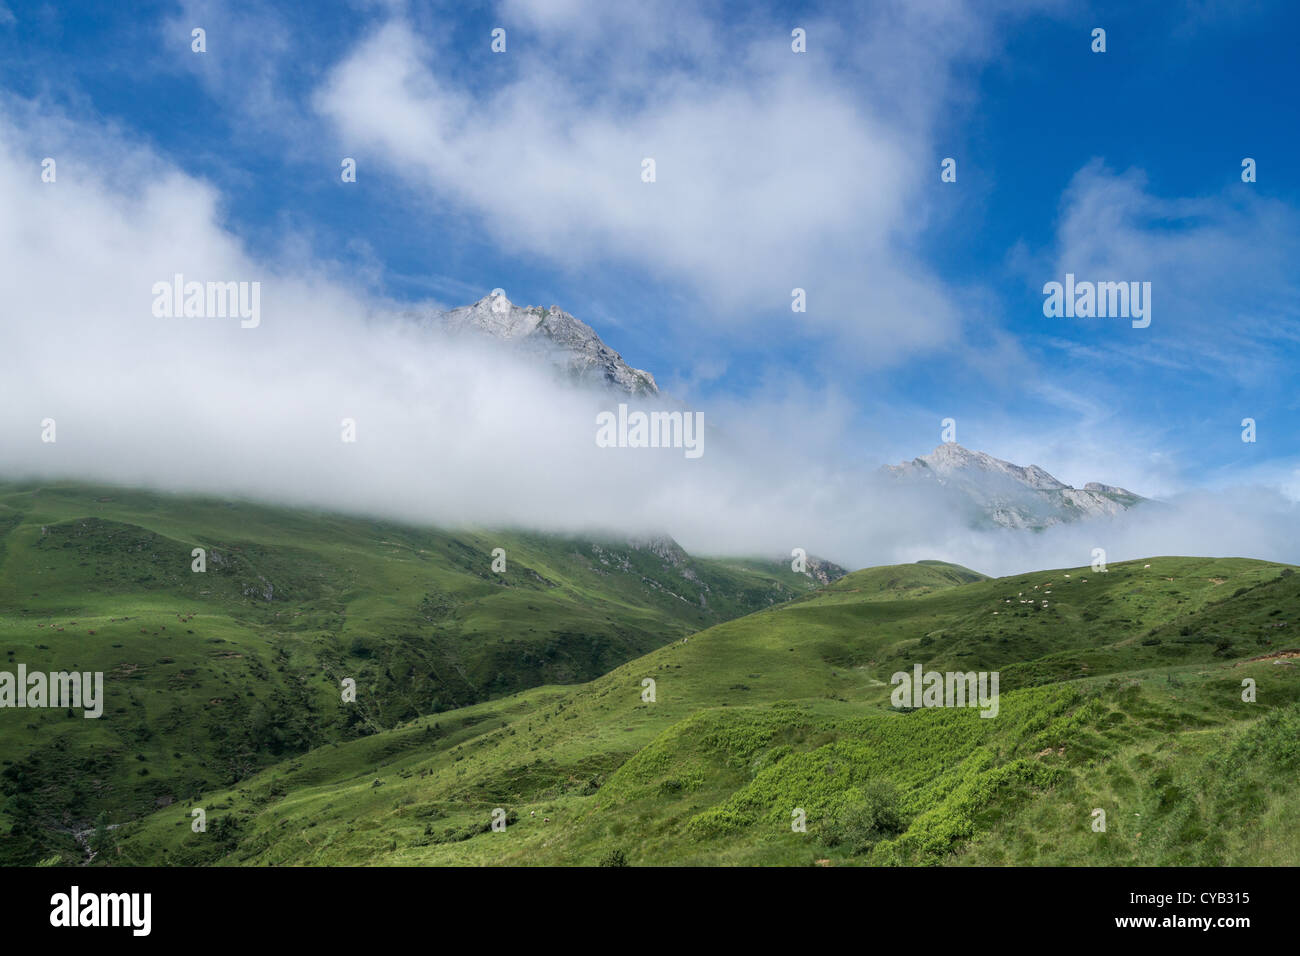 View of Pyrenees National Park in Pyrénées-Atlantiques department of France Stock Photo